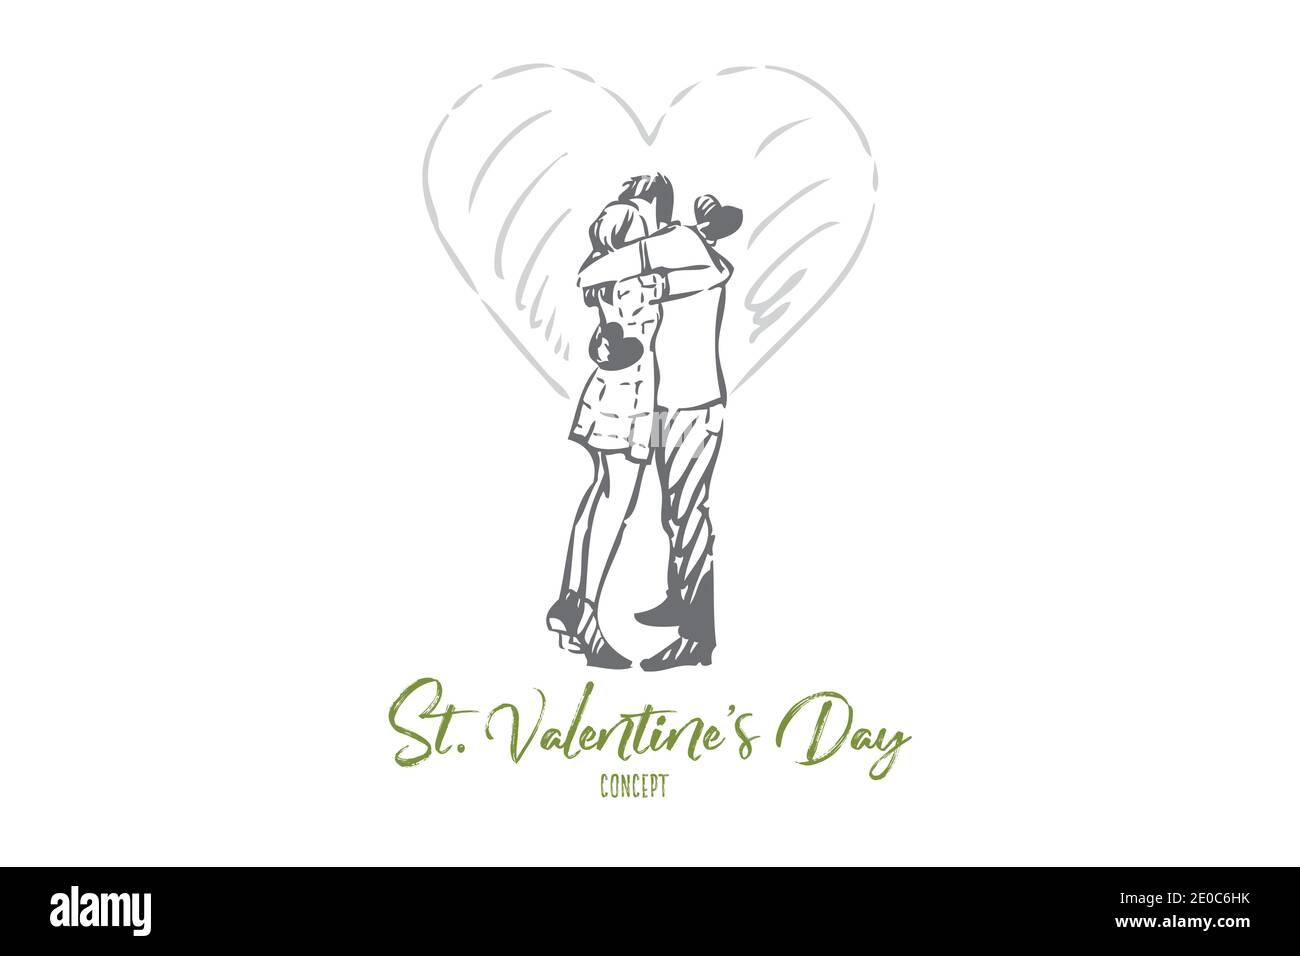 Man Carrying His Girlfriend Sketch Icon Stock Vector (Royalty Free)  471124148 | Shutterstock